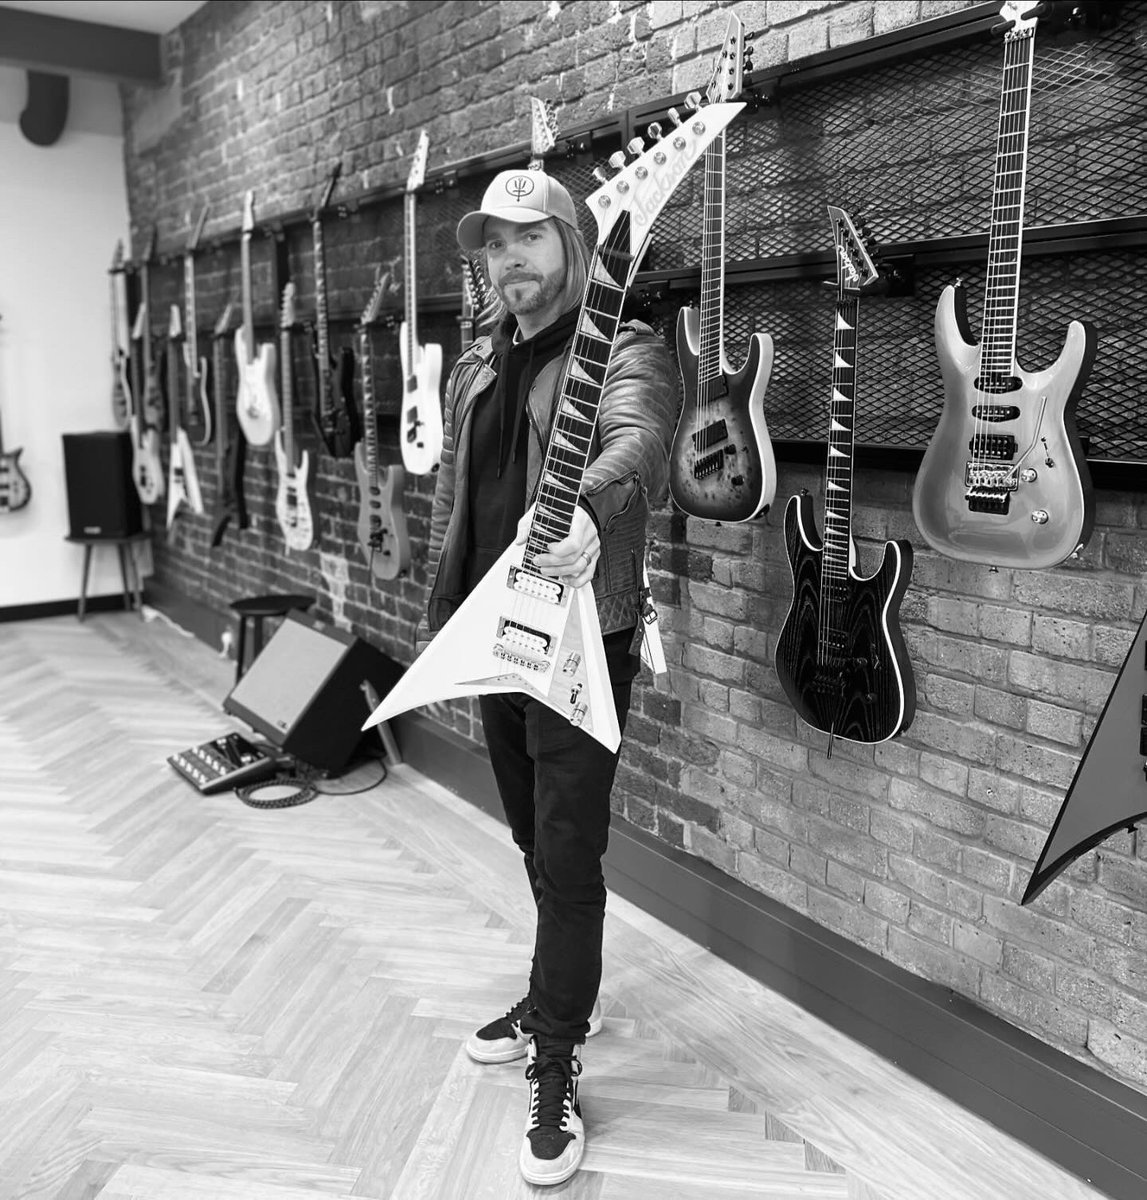 ☠️ OMG 🤤 🤤🤤🤤 Huge thankyou to @JacksonGuitars for this drop dead gorgeous MJ SERIES RHOADS RRT. Can’t overstate how awesome the visit to the Jackson showroom was. Thank you for being so accommodating with my family etc. The neck profile on this guitar is just 👌👌👌👌 That